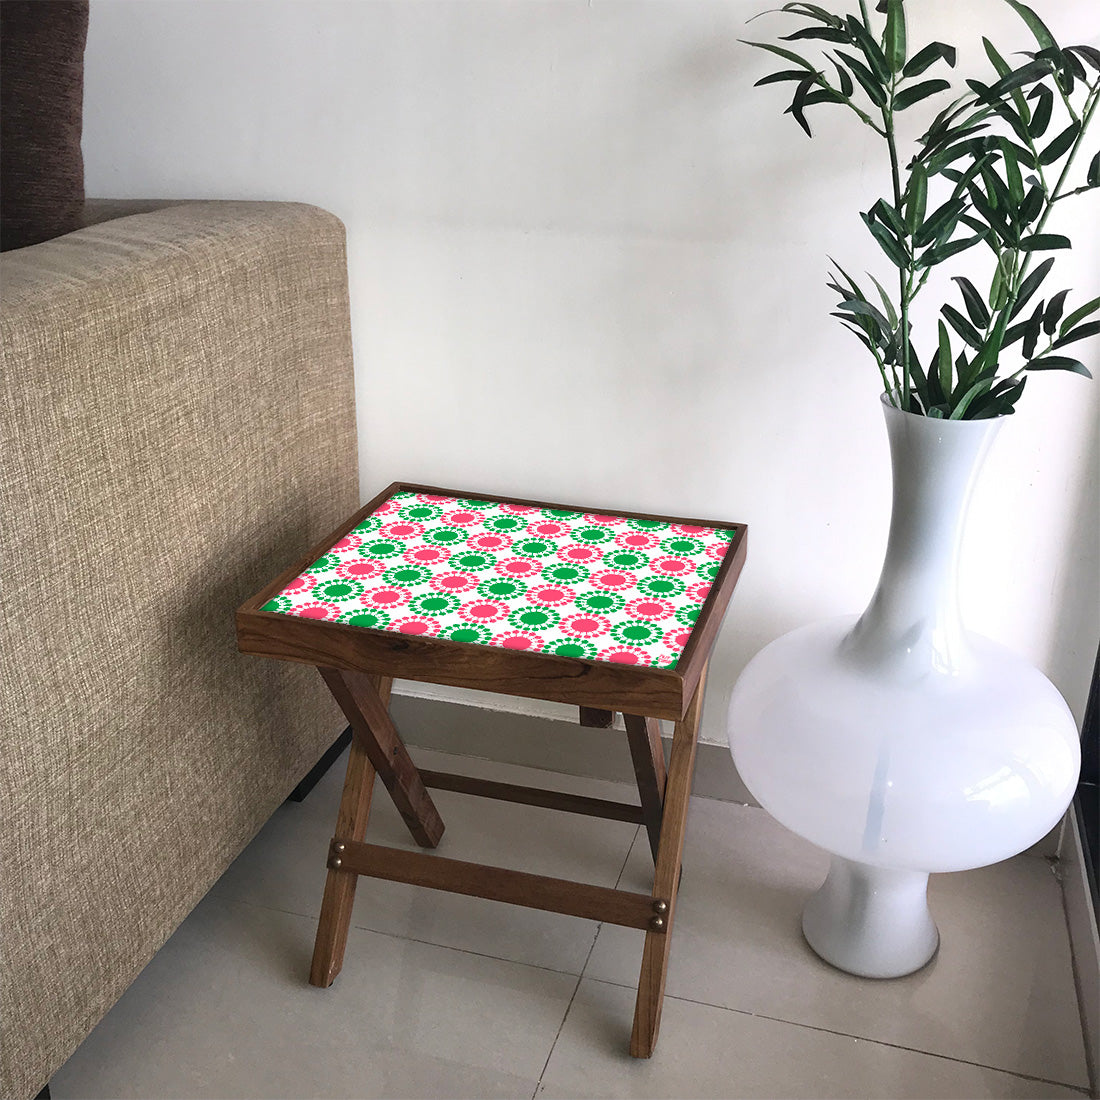 Folding Side Table - Teak Wood - Pink And Green Circle